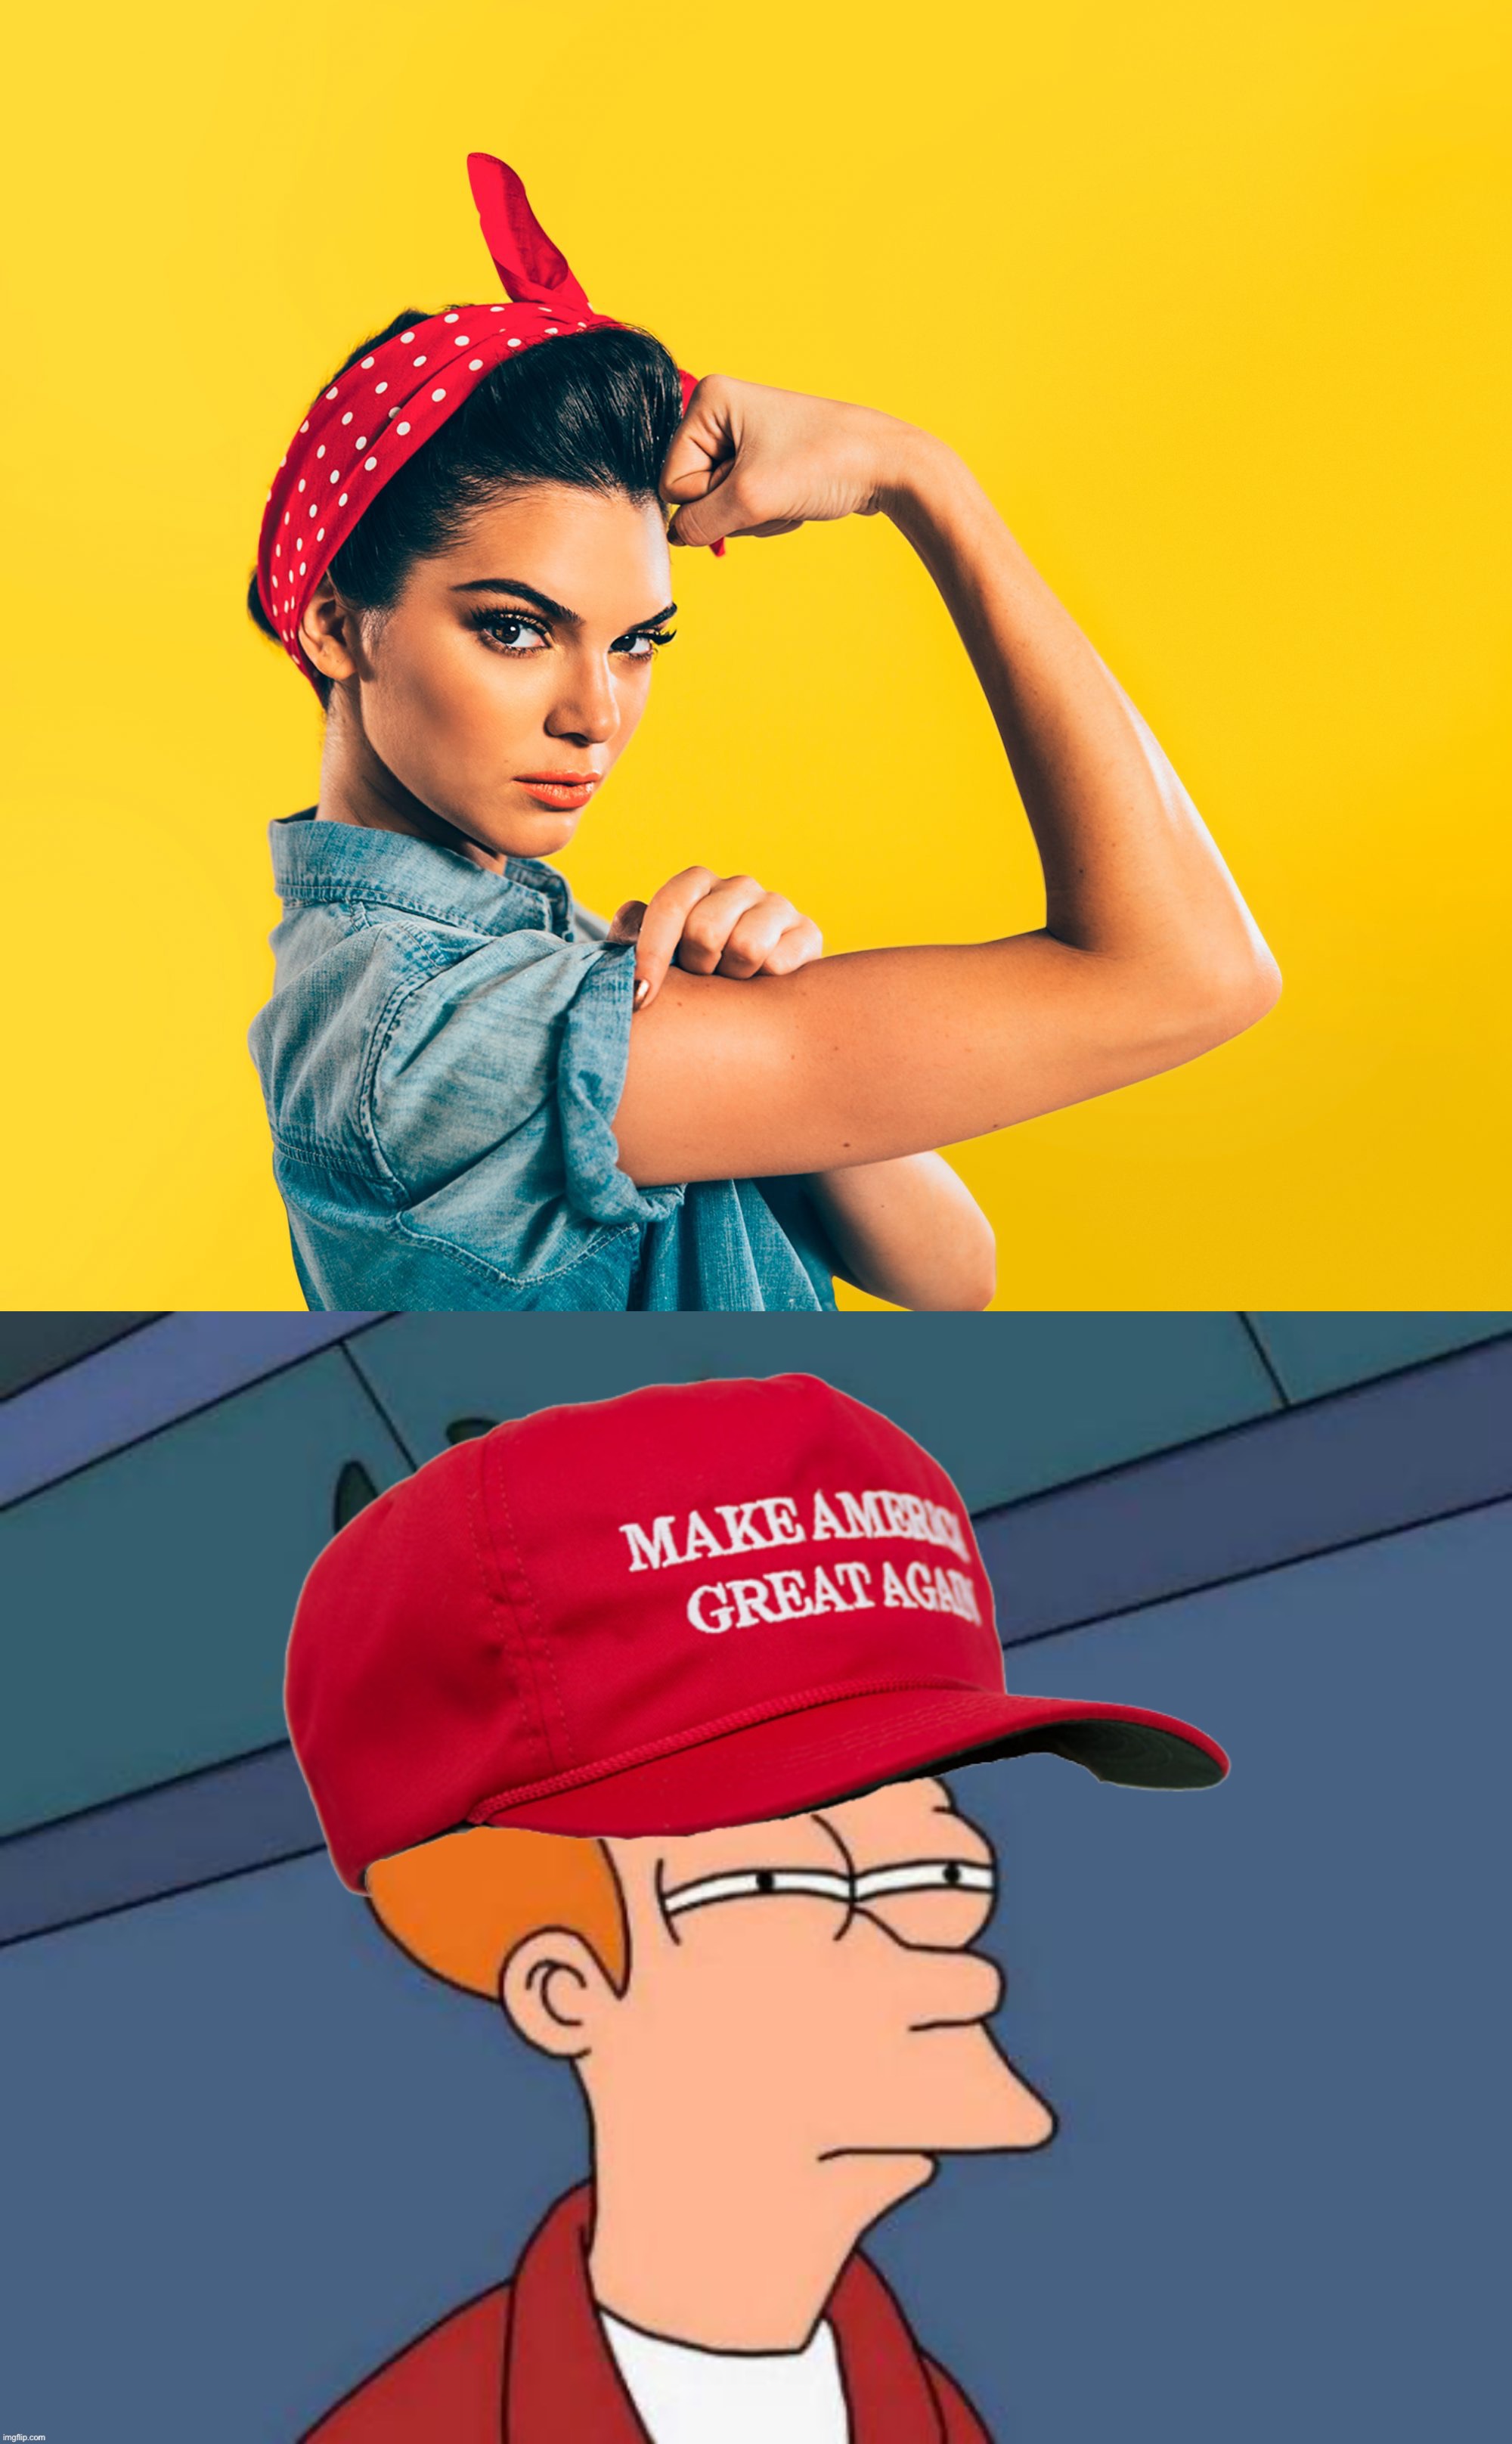 Not sure if she stole my red wave | image tagged in rosie the riveter redux,maga futurama fry,2022,midterms,women,out-of-place futurama fry | made w/ Imgflip meme maker